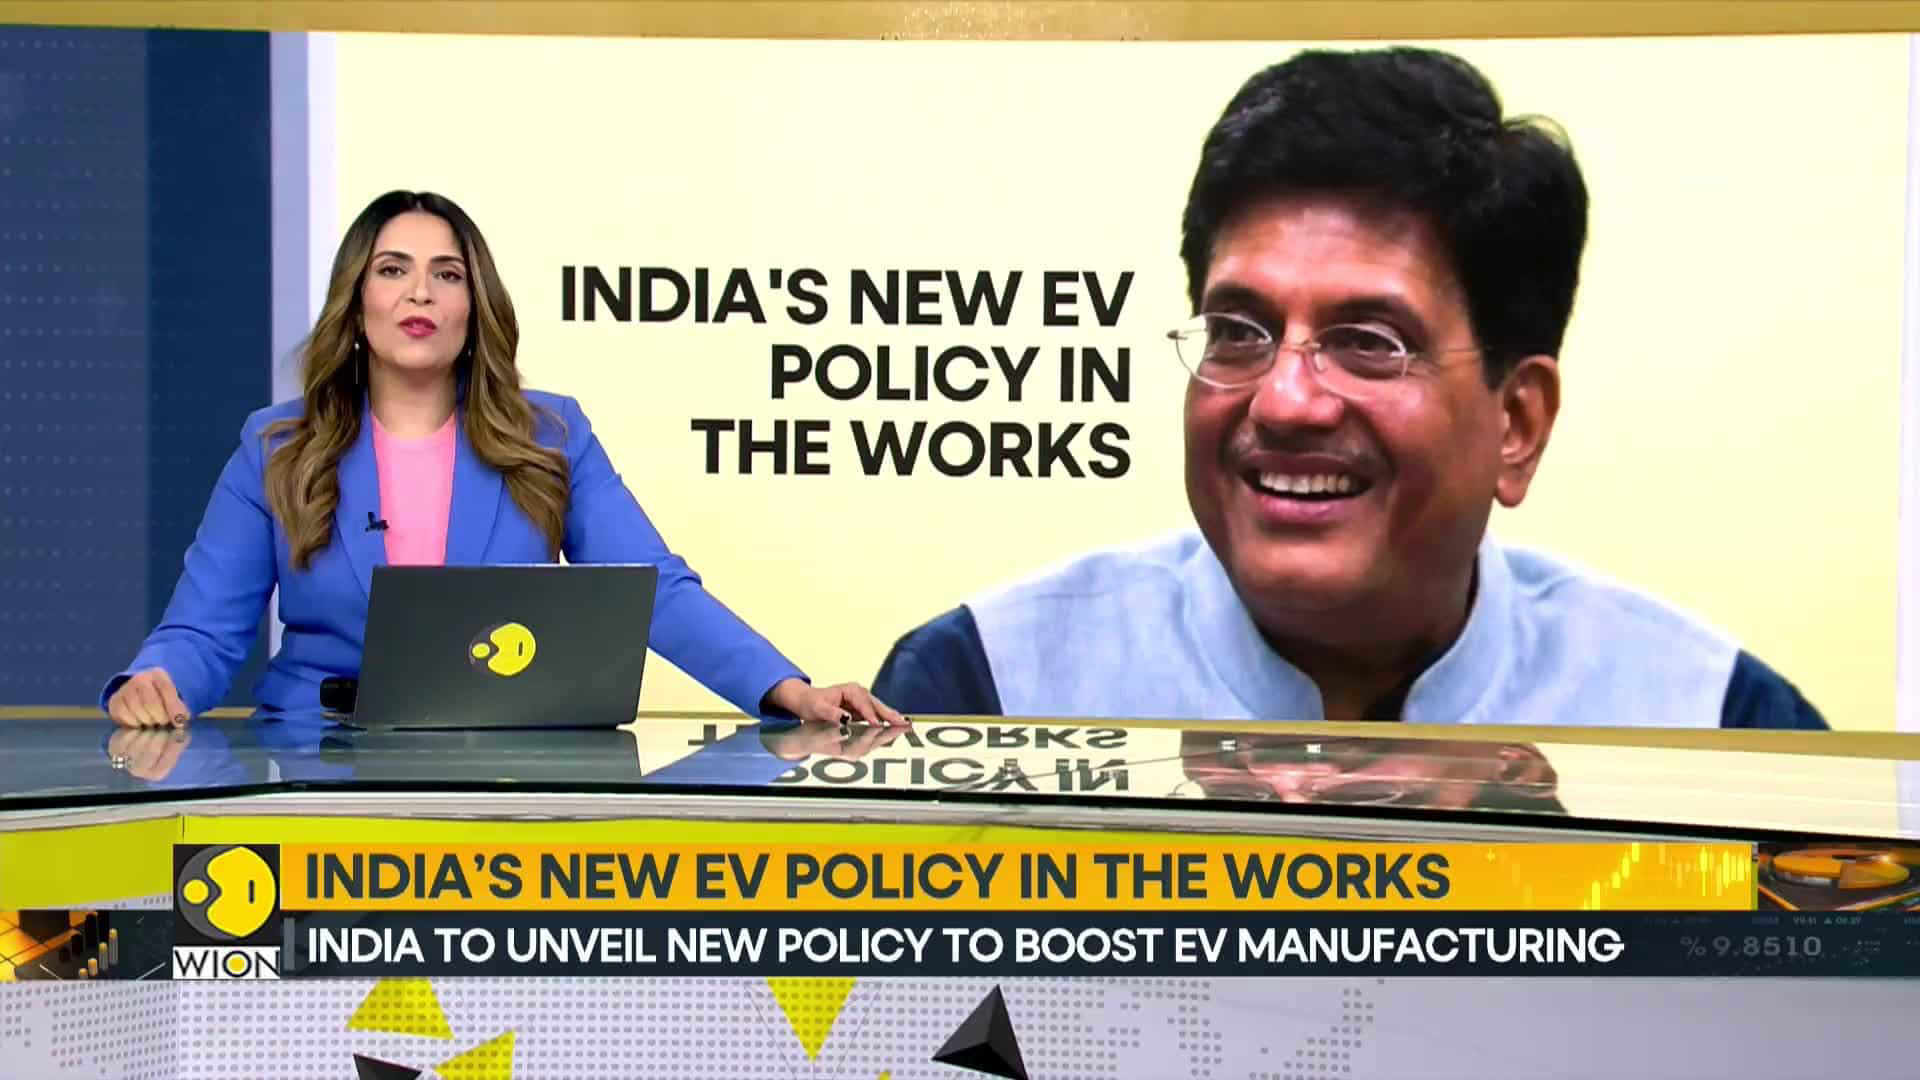 India's new EV policy in the work: Empowering India's EV industry